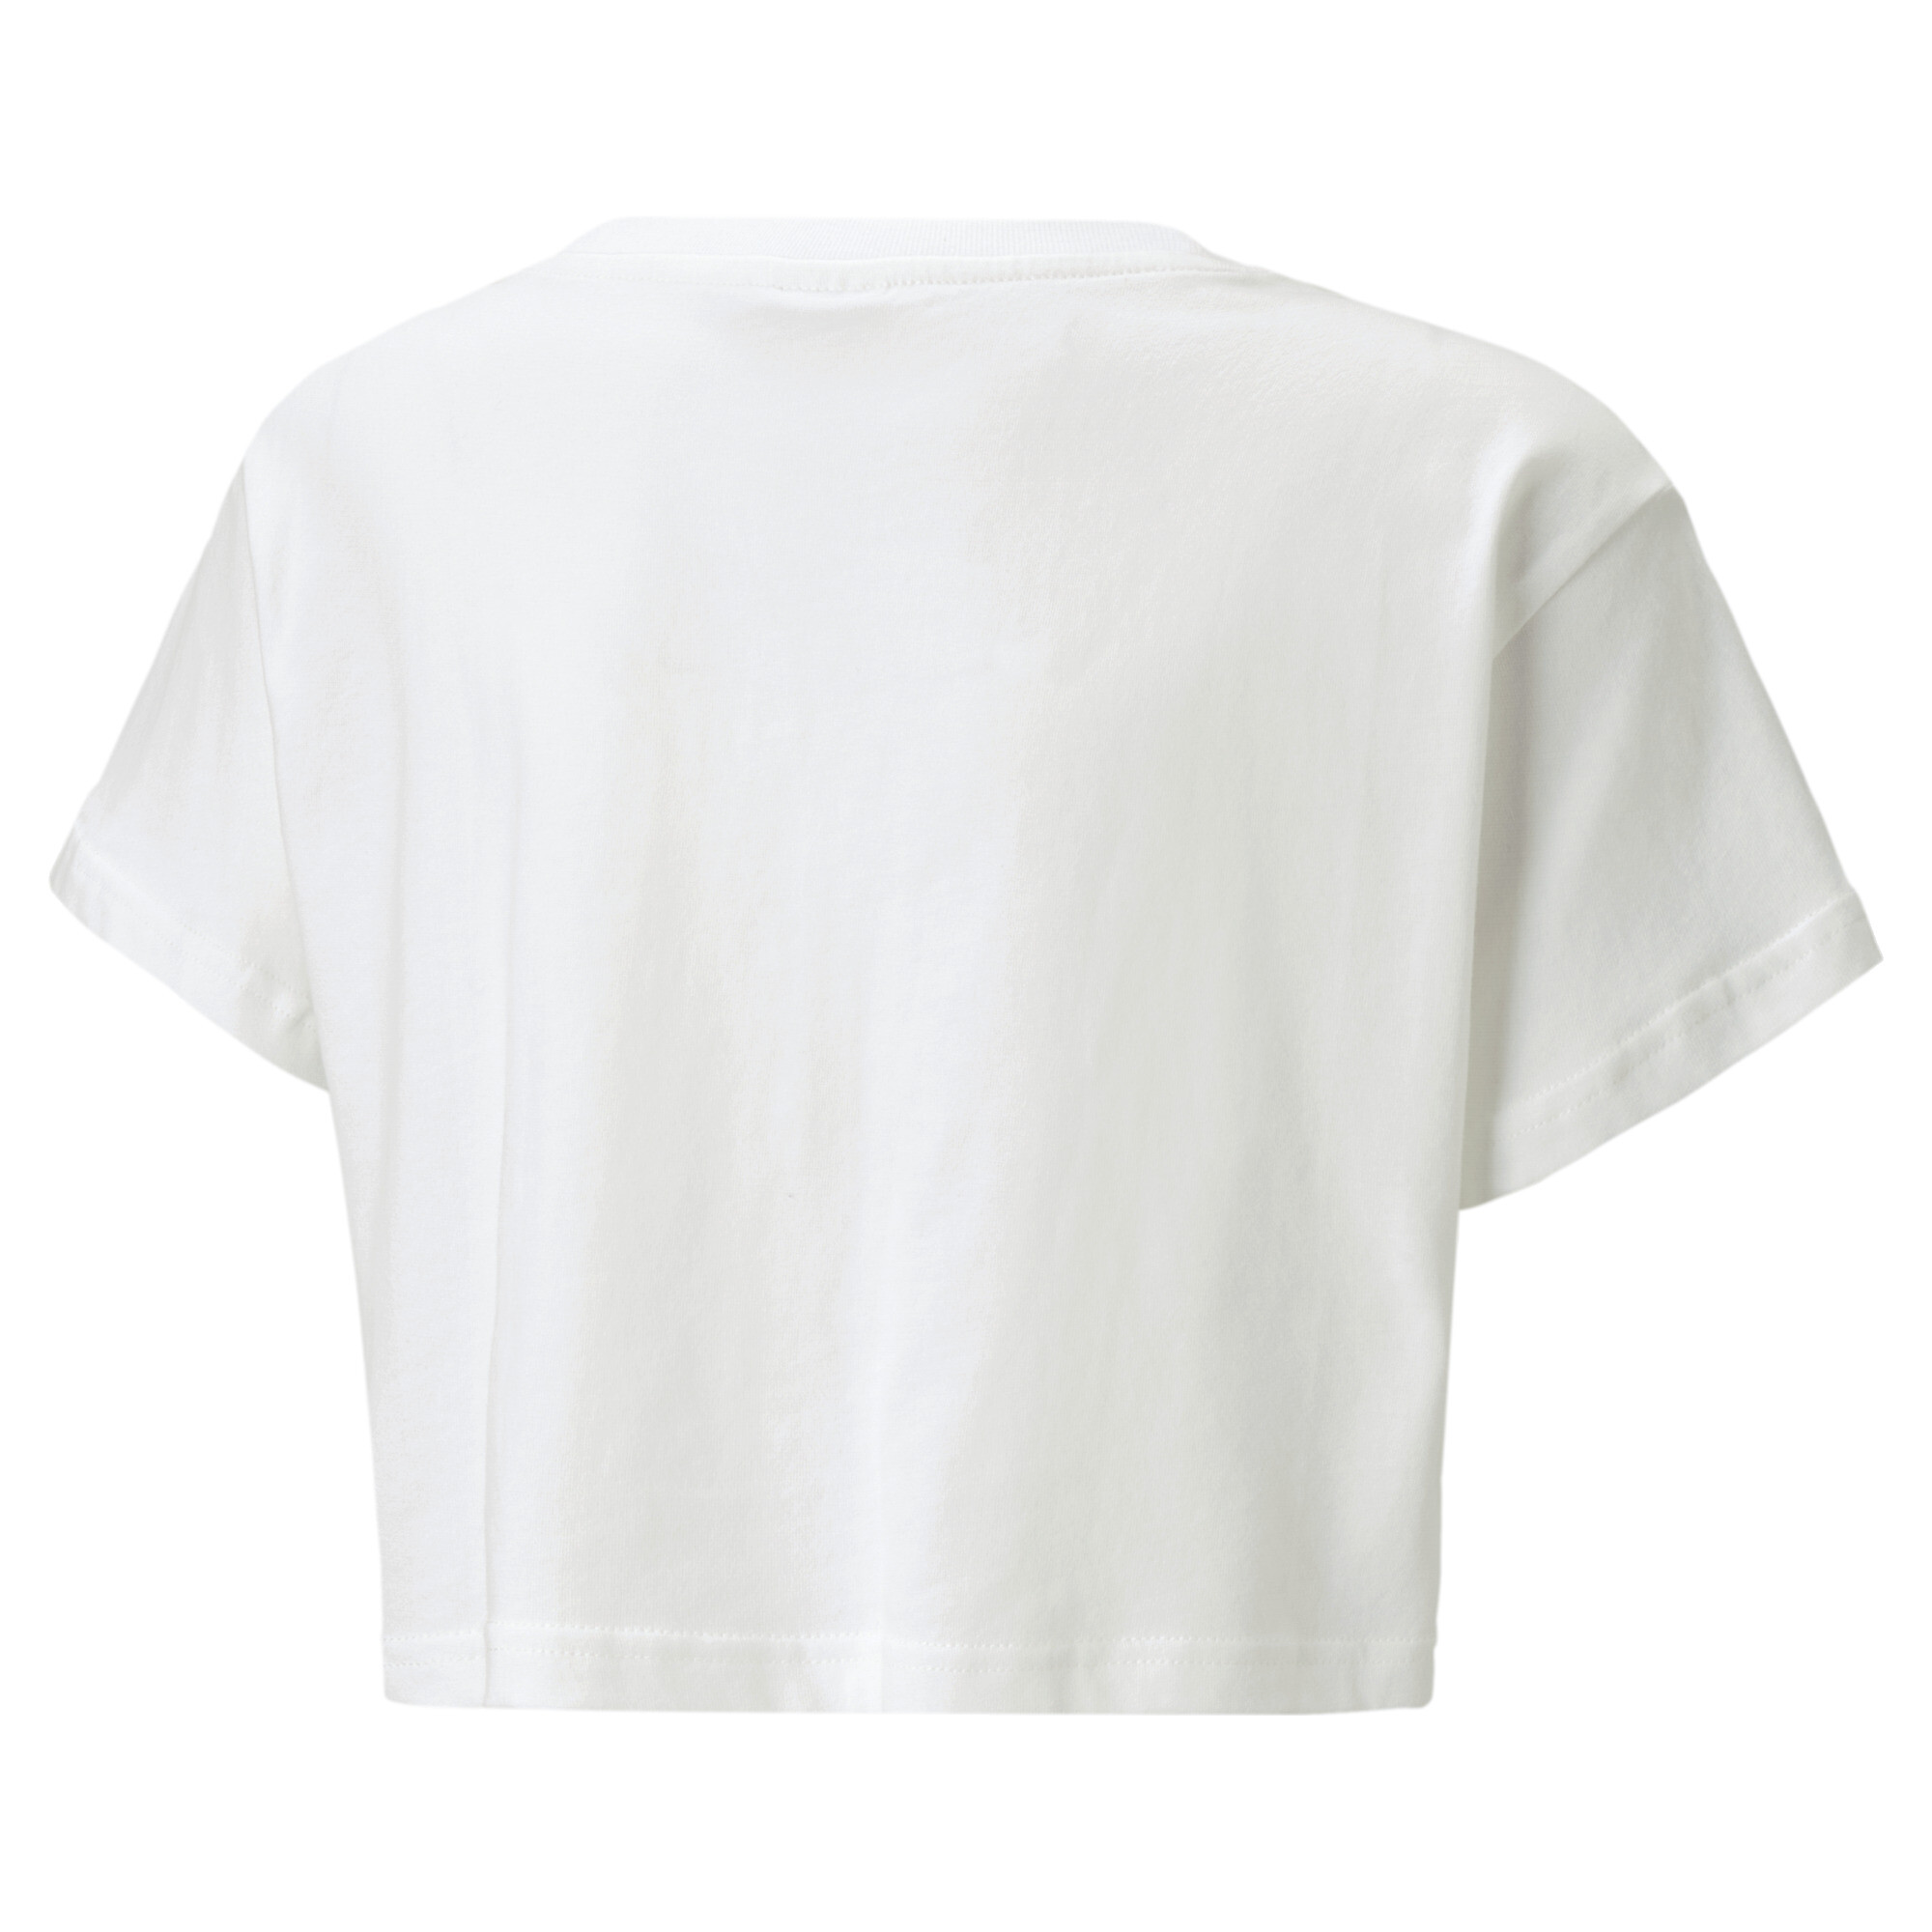 PUMA Classics T-Shirt In 20 - White, Size 9-10 Youth